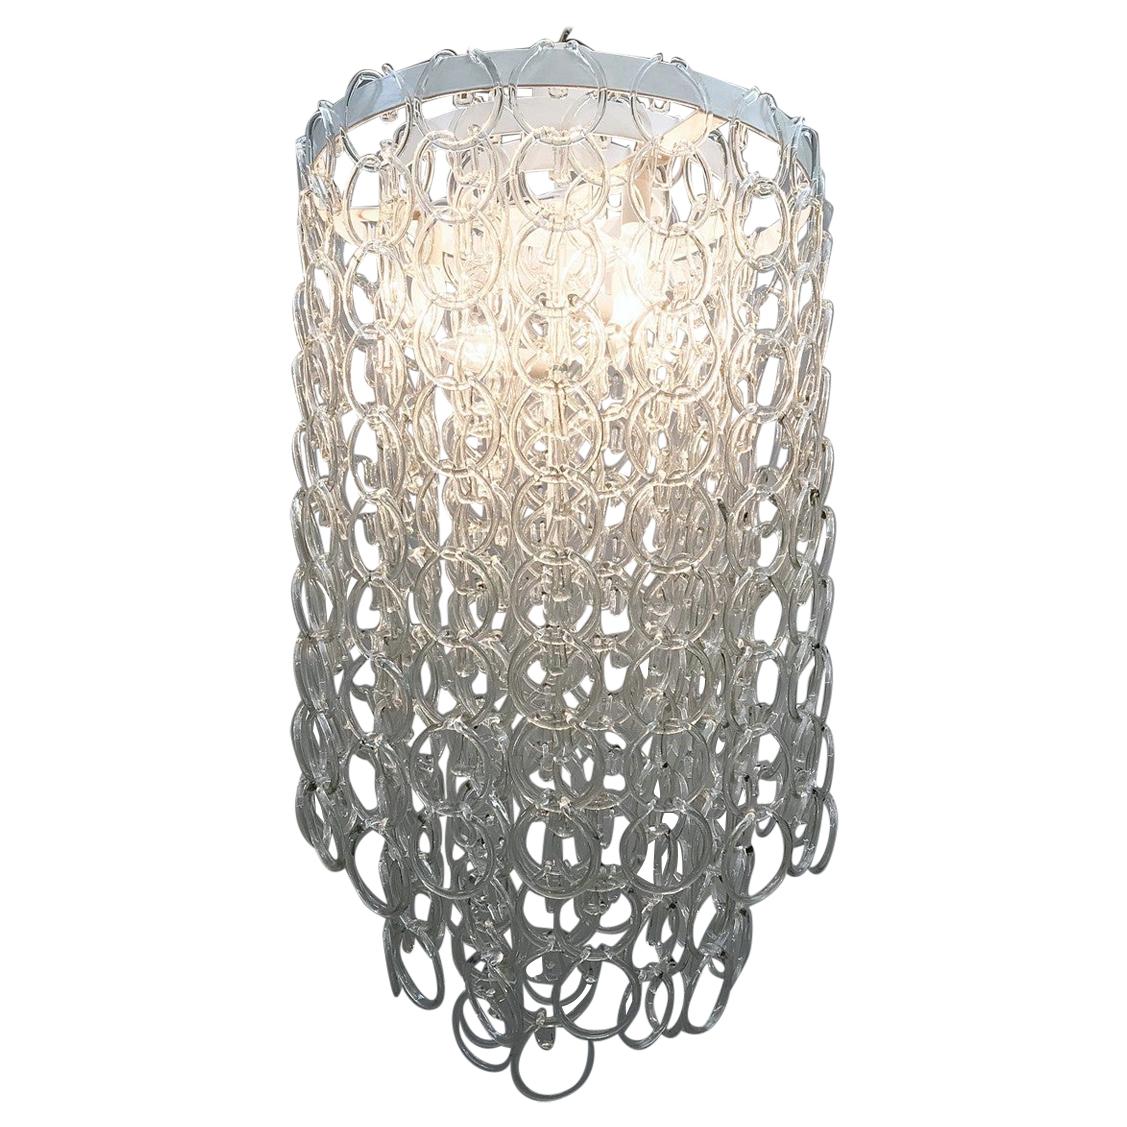 Italian Glass Link Chandelier, a Pair Available